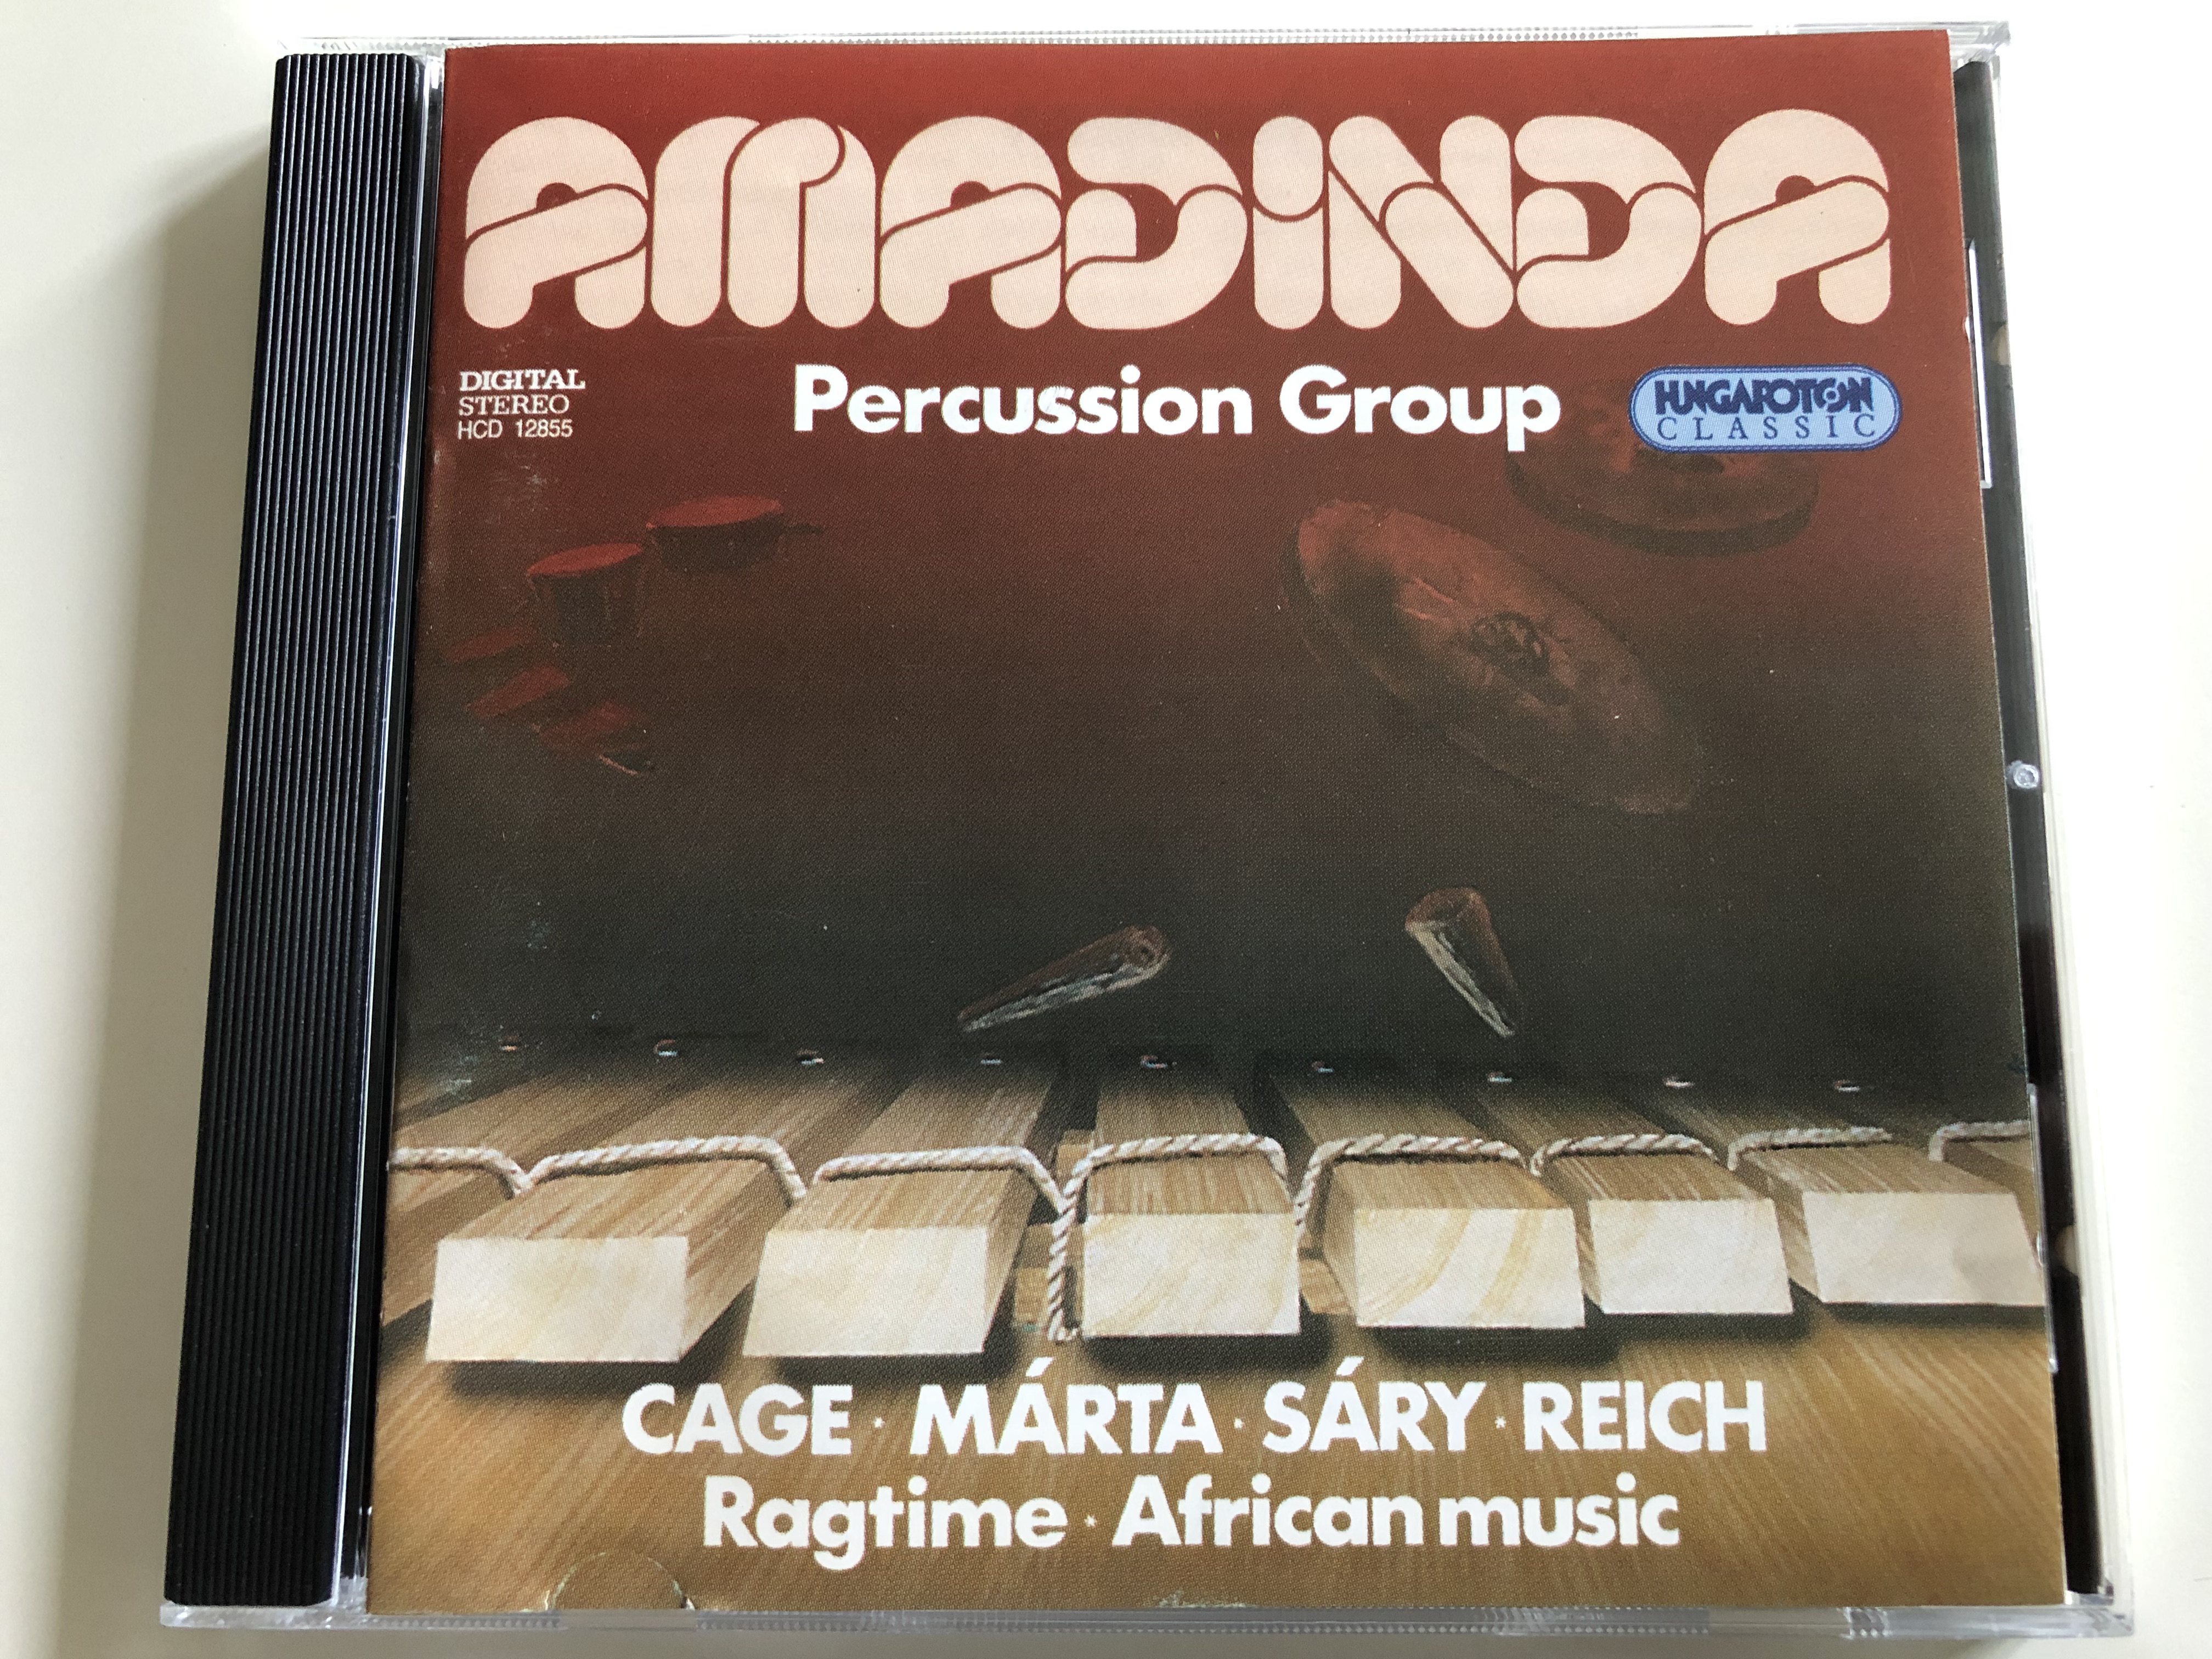 amadinda-percussion-group-cage-m-rta-s-ry-reich-ragtime-african-music-hungaroton-classic-audio-cd-1994-hcd-12855-1-.jpg